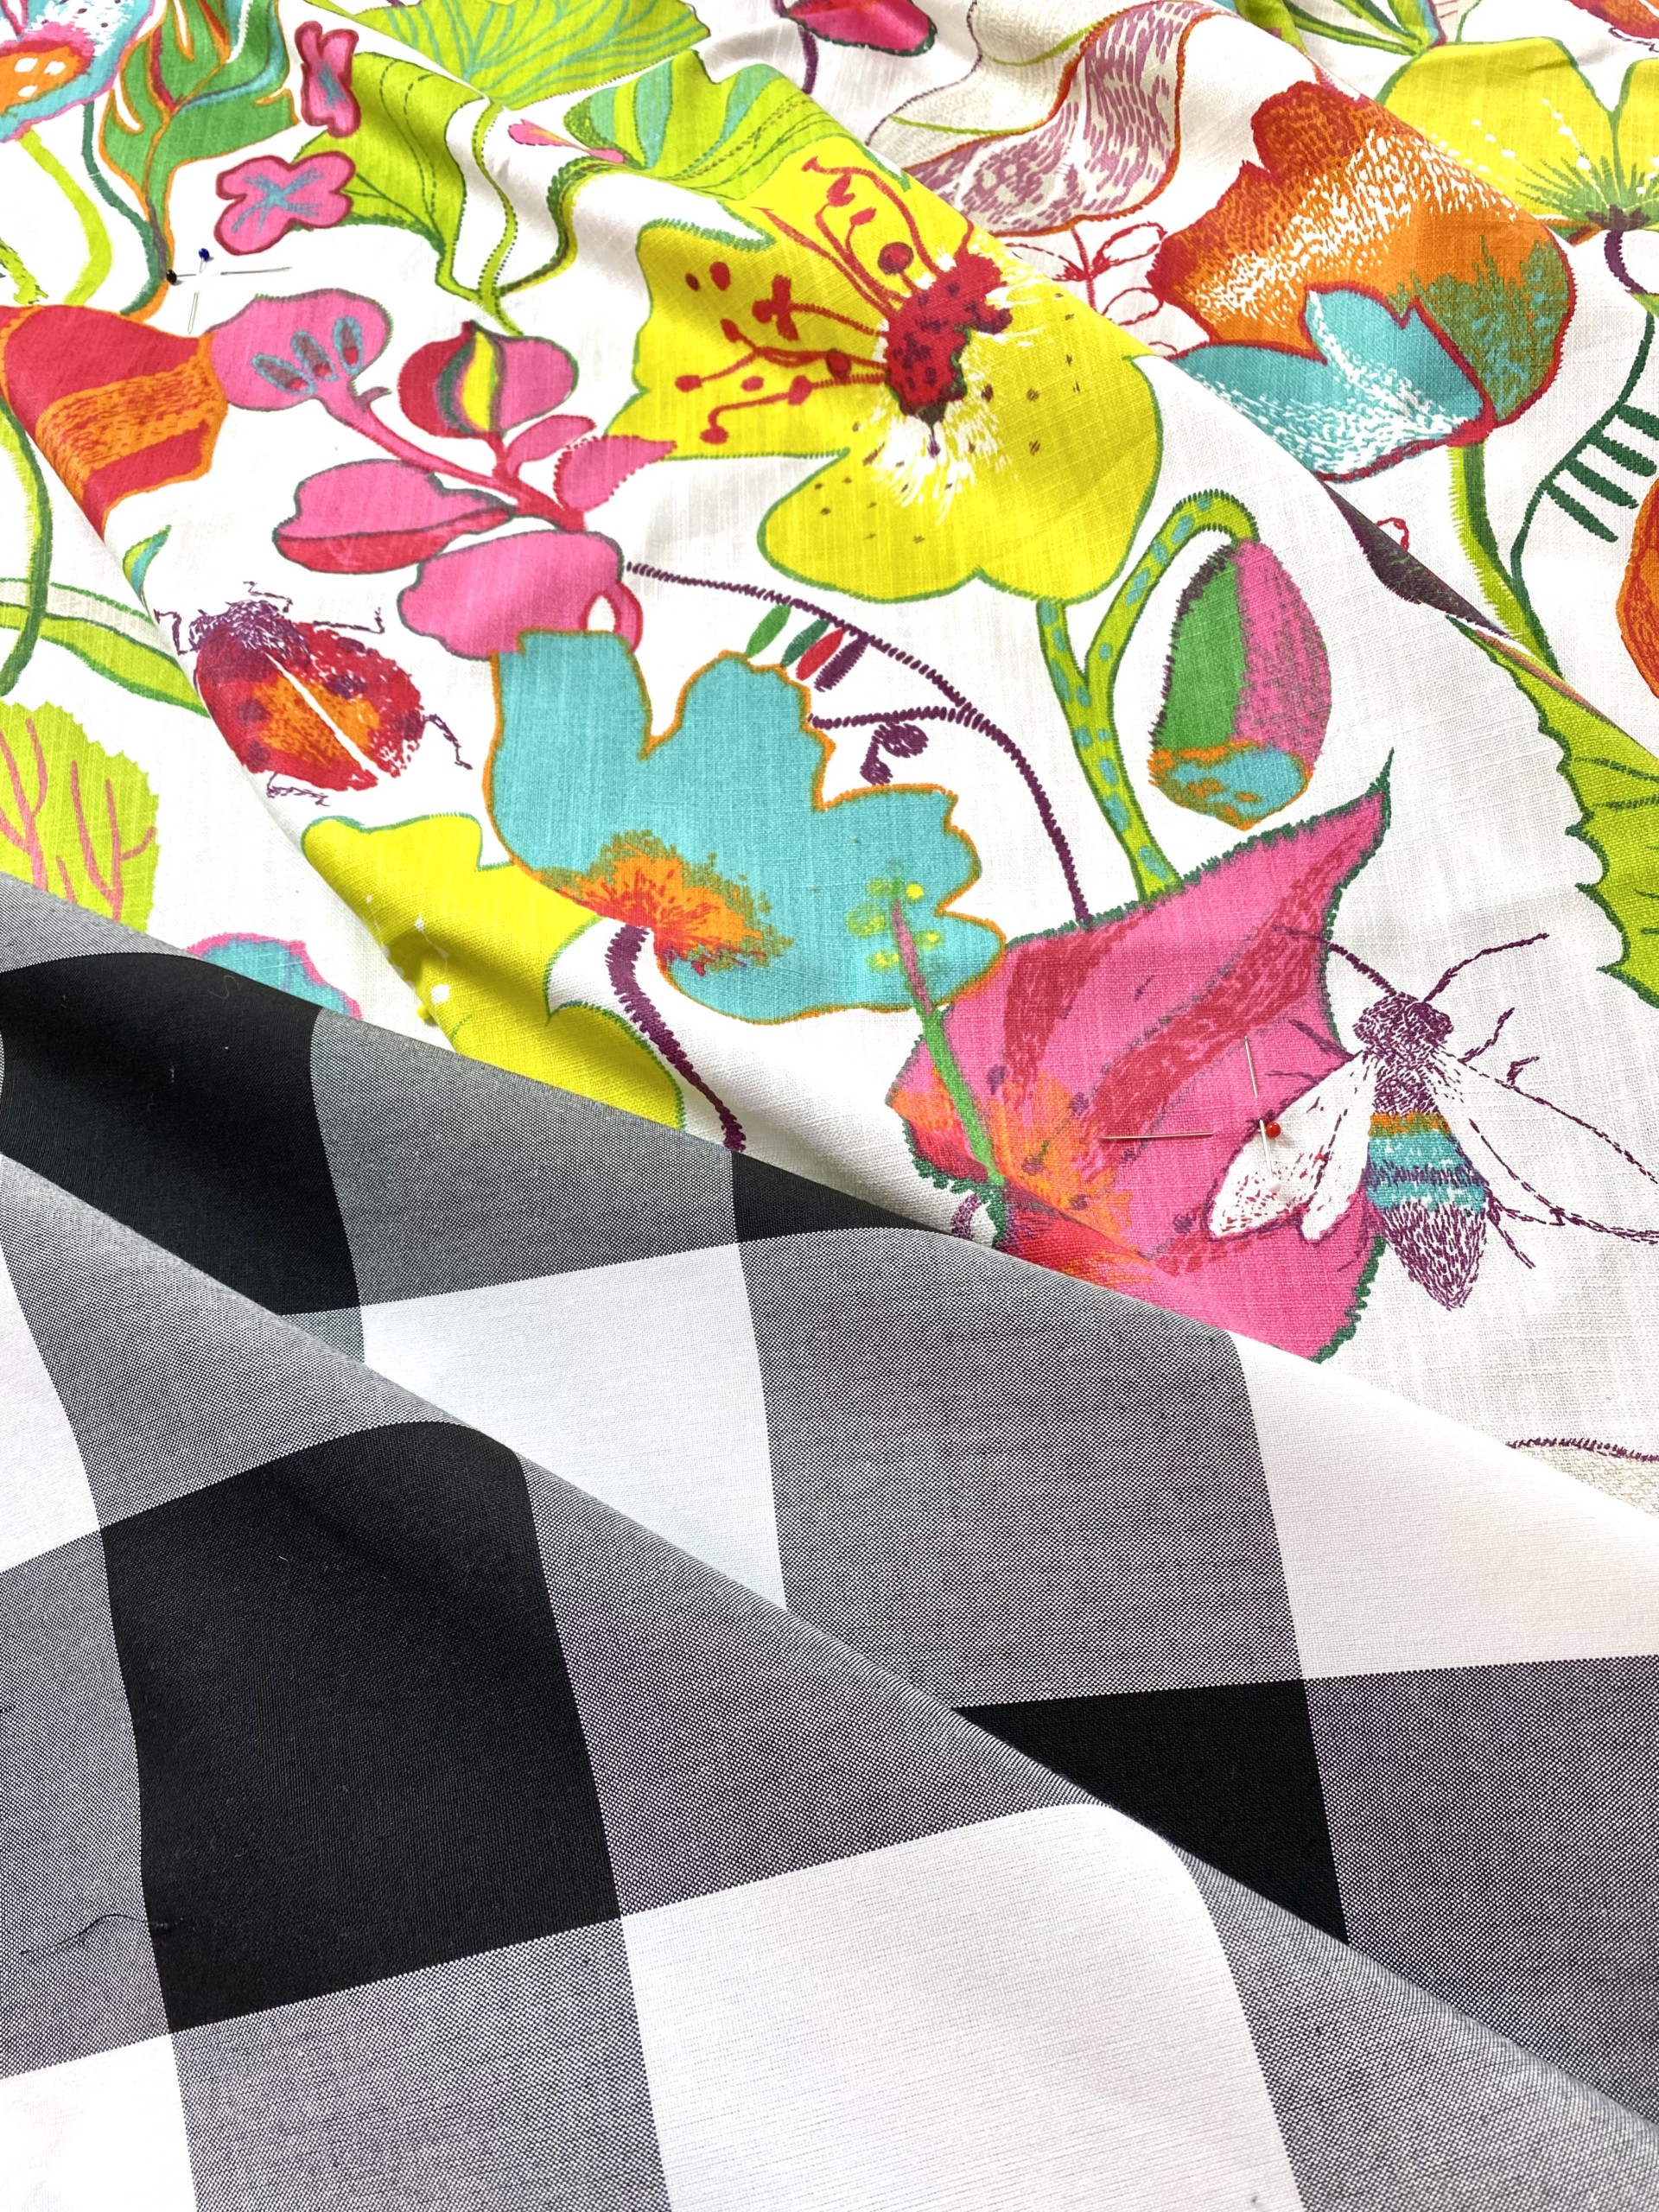 Selecting fun and colorful Upholstery Fabrics